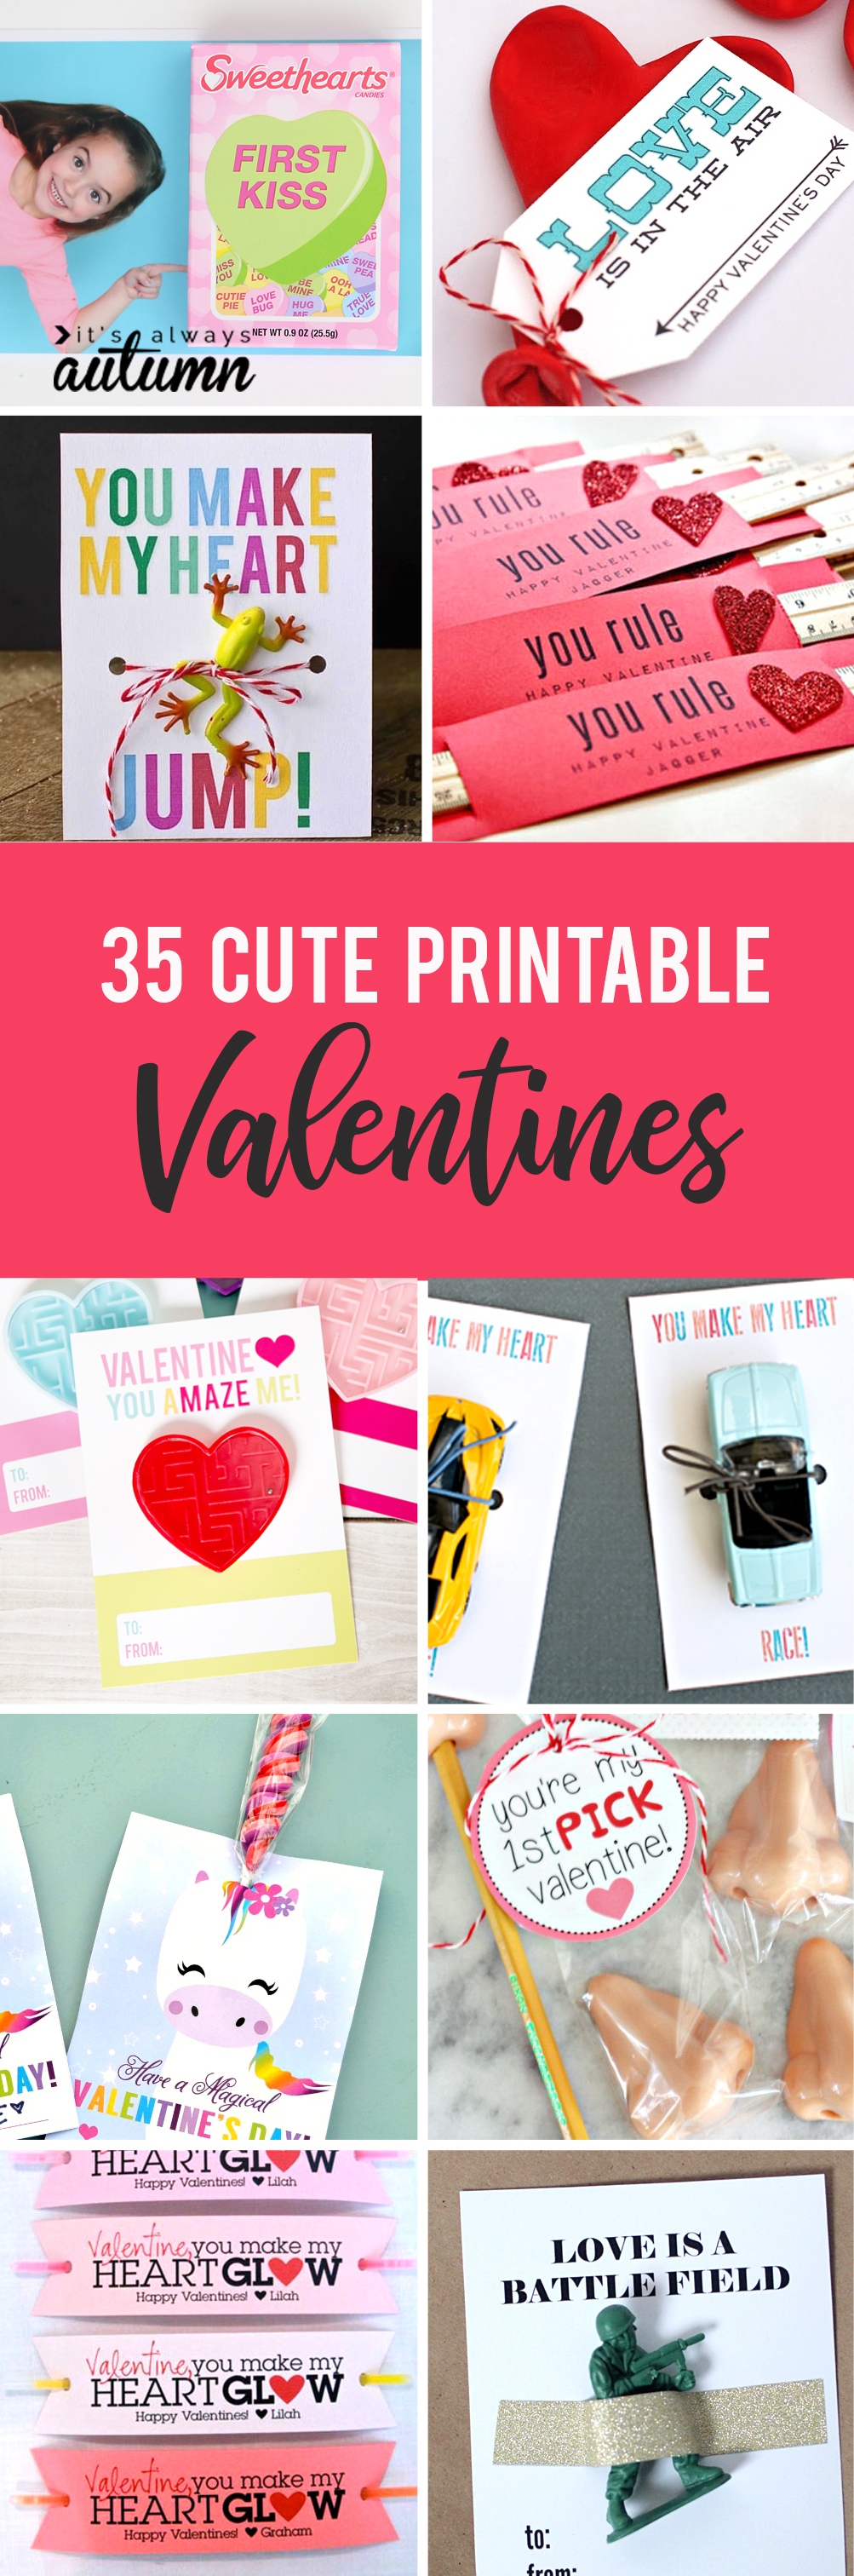 35 Adorable Diy Valentine's Cards To Print At Home For Your Pertaining To Valentine Card Template For Kids